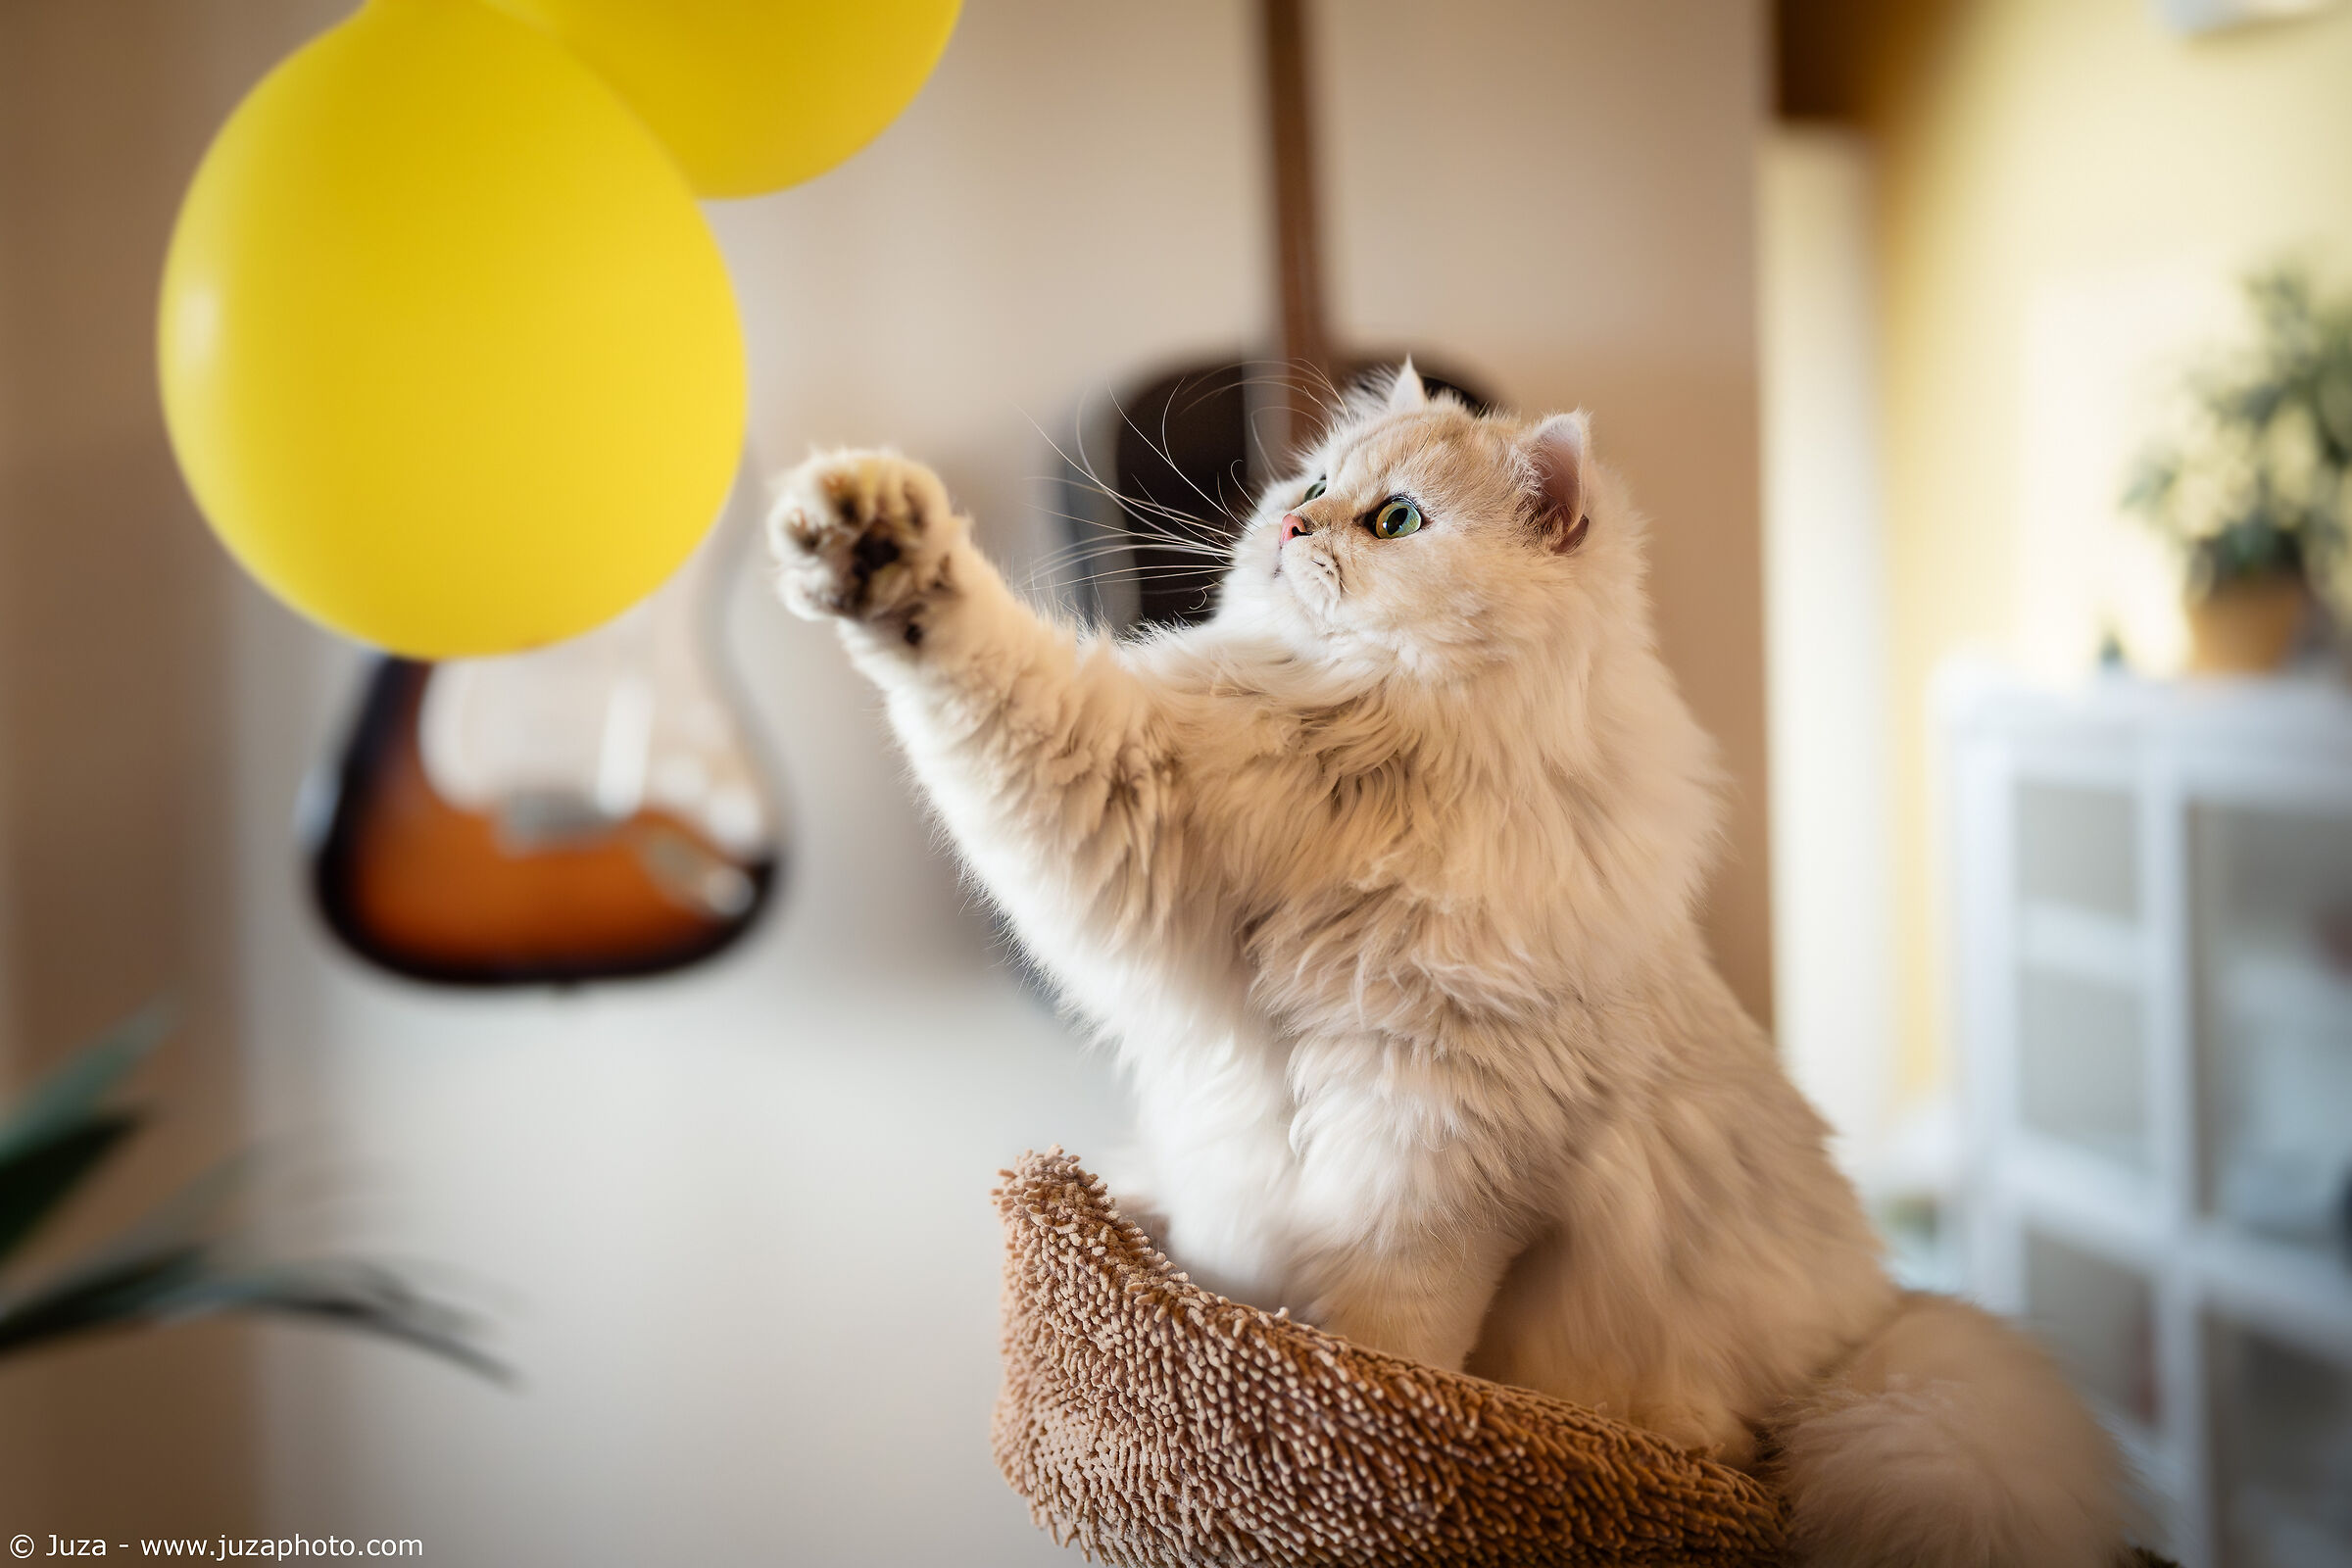 The Cat and the Balloons...